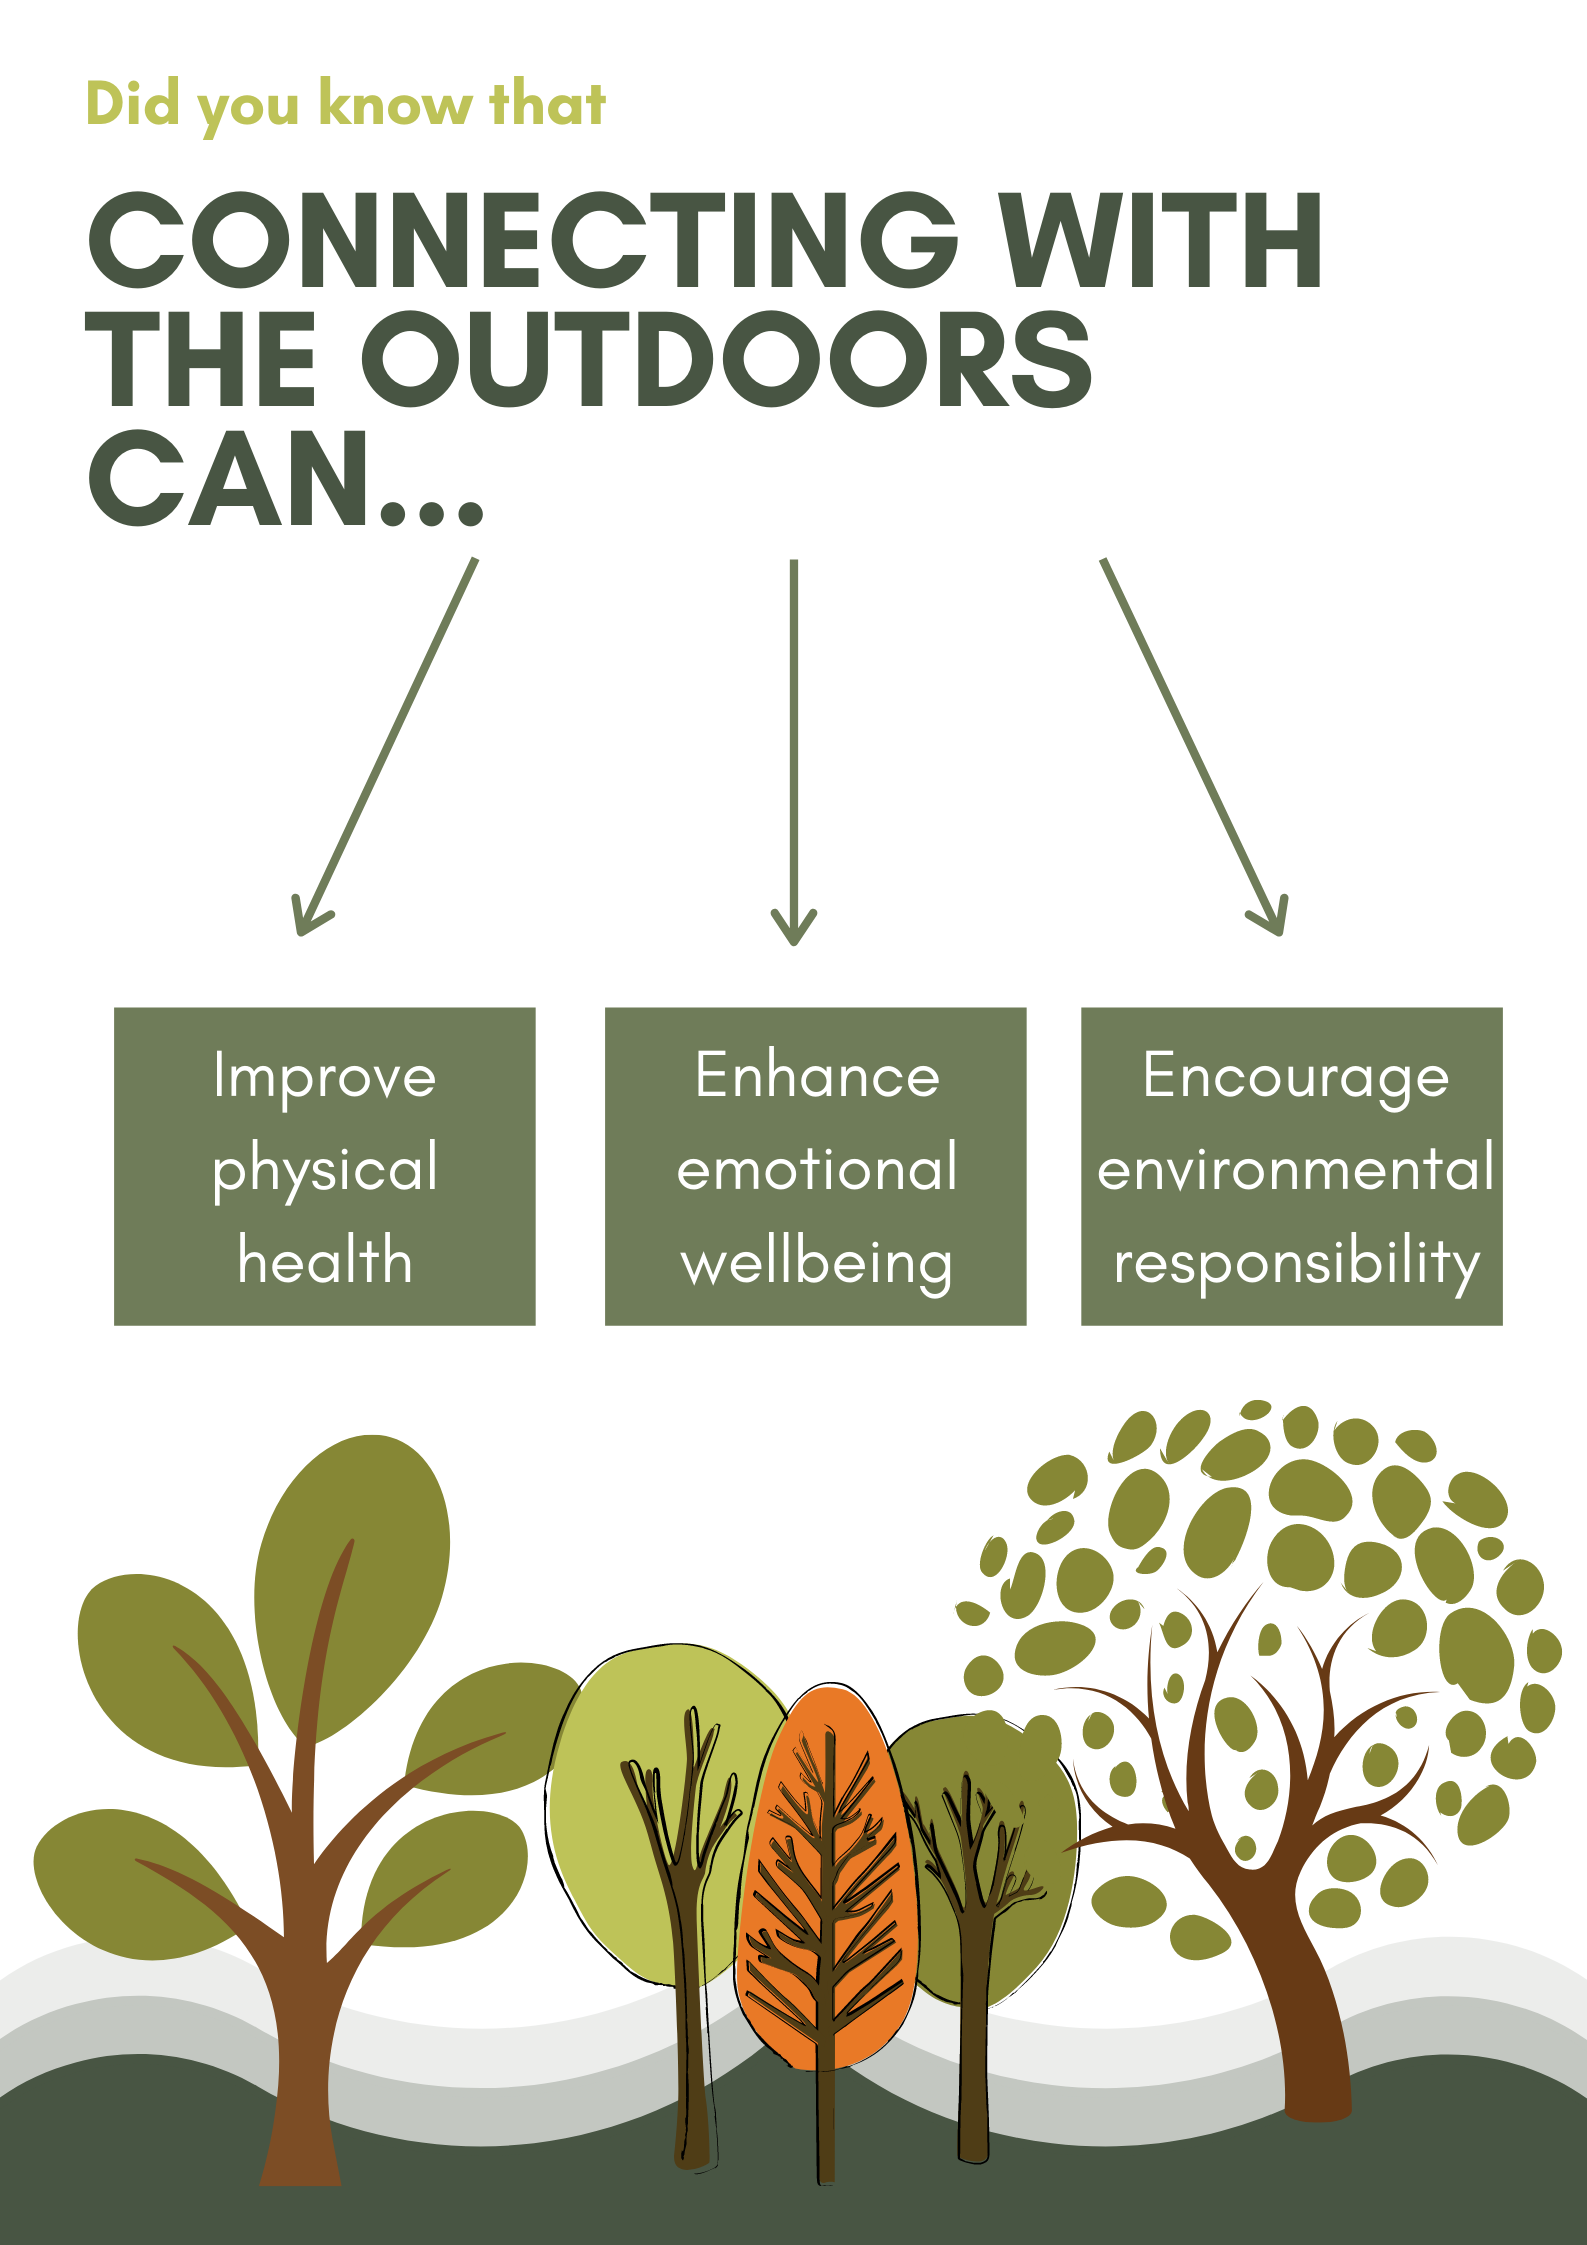 connecting with the outdoors improves physical health, enhances mental wellness, and encourages environmental responsibility